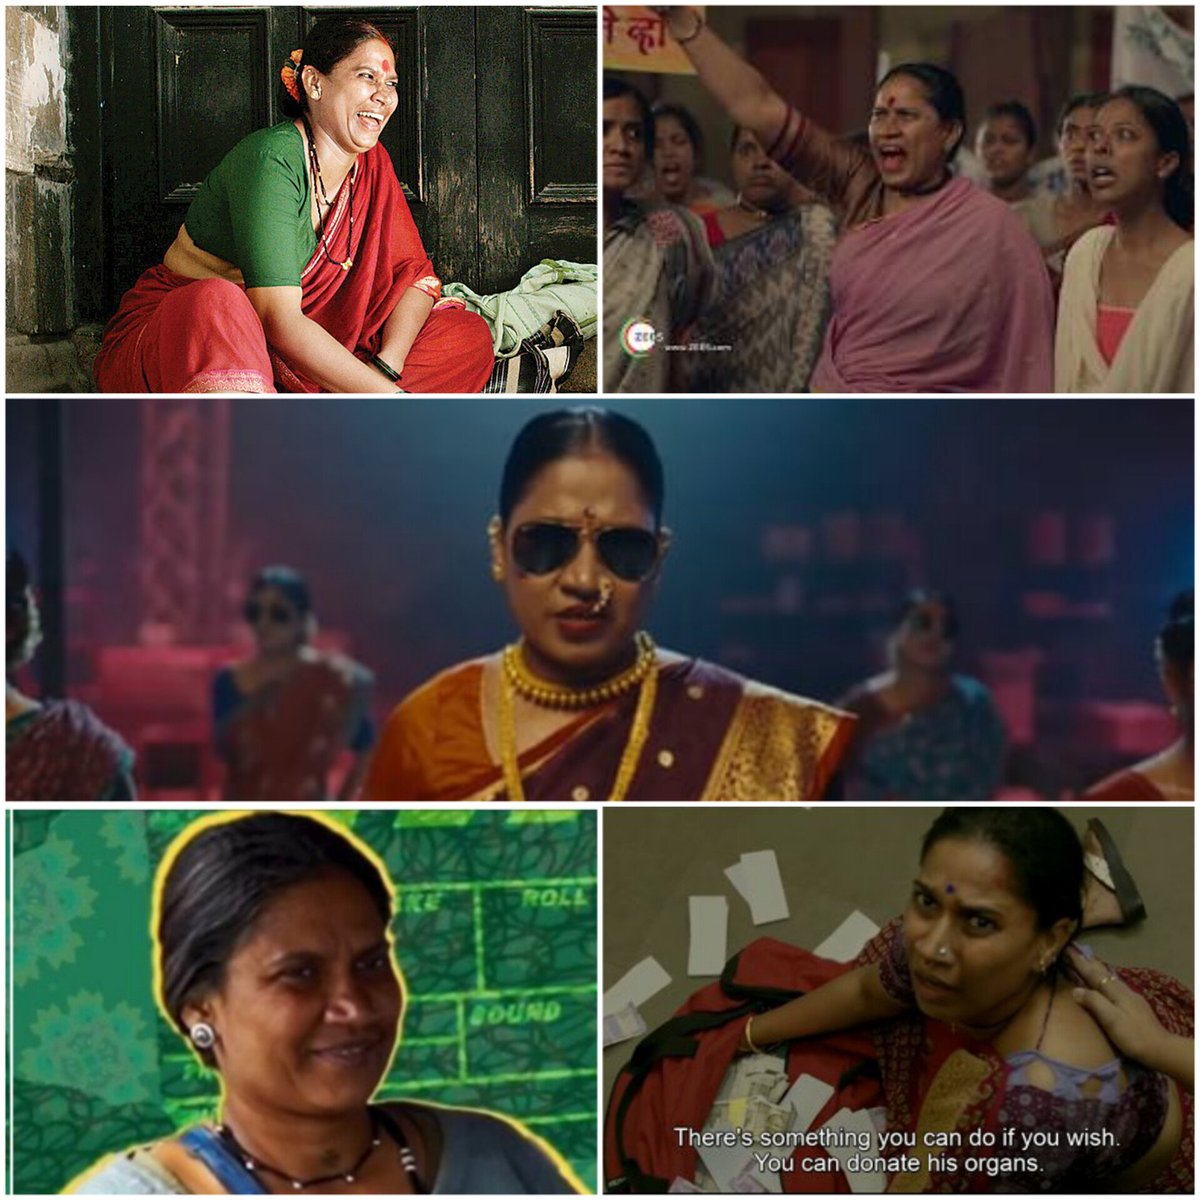 From seeing her first time in Andhadhun then in Gangubai, Laapata Ladies to the latest in Madgaon Express as Kanchan Kombdi, Chhaya Kadam has been winning hearts all over with her amazing performances.
#kanchankombdi #chhayakadam